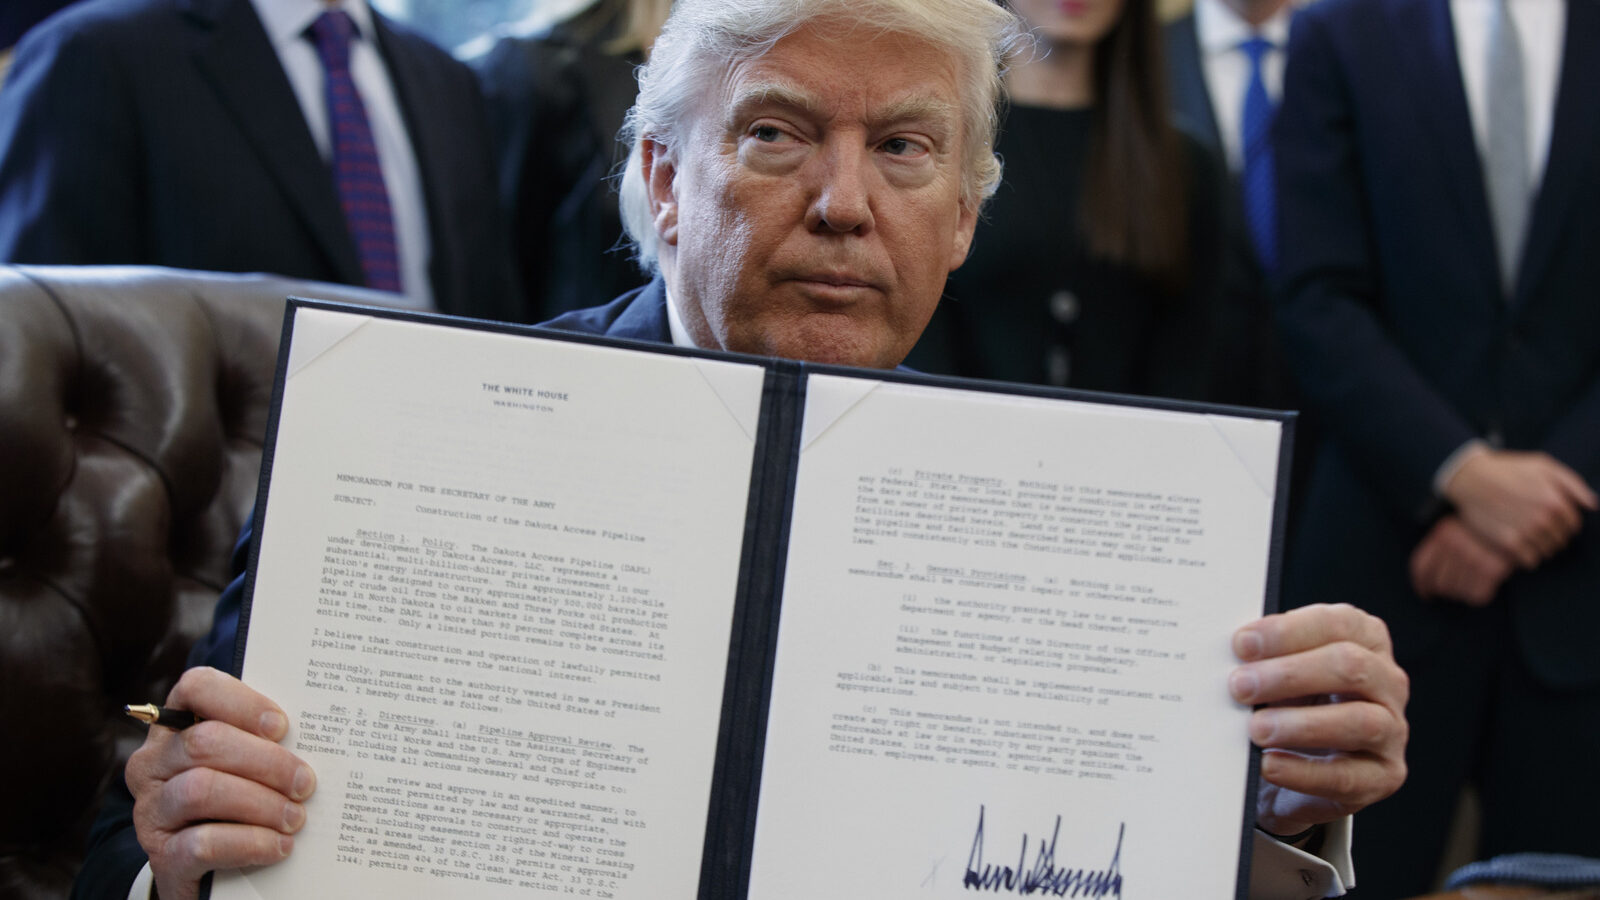 President Donald Trump shows off his signature on an executive order about the Dakota Access pipeline, Tuesday, Jan. 24, 2017, in the Oval Office of the White House in Washington. (AP/Evan Vucci)